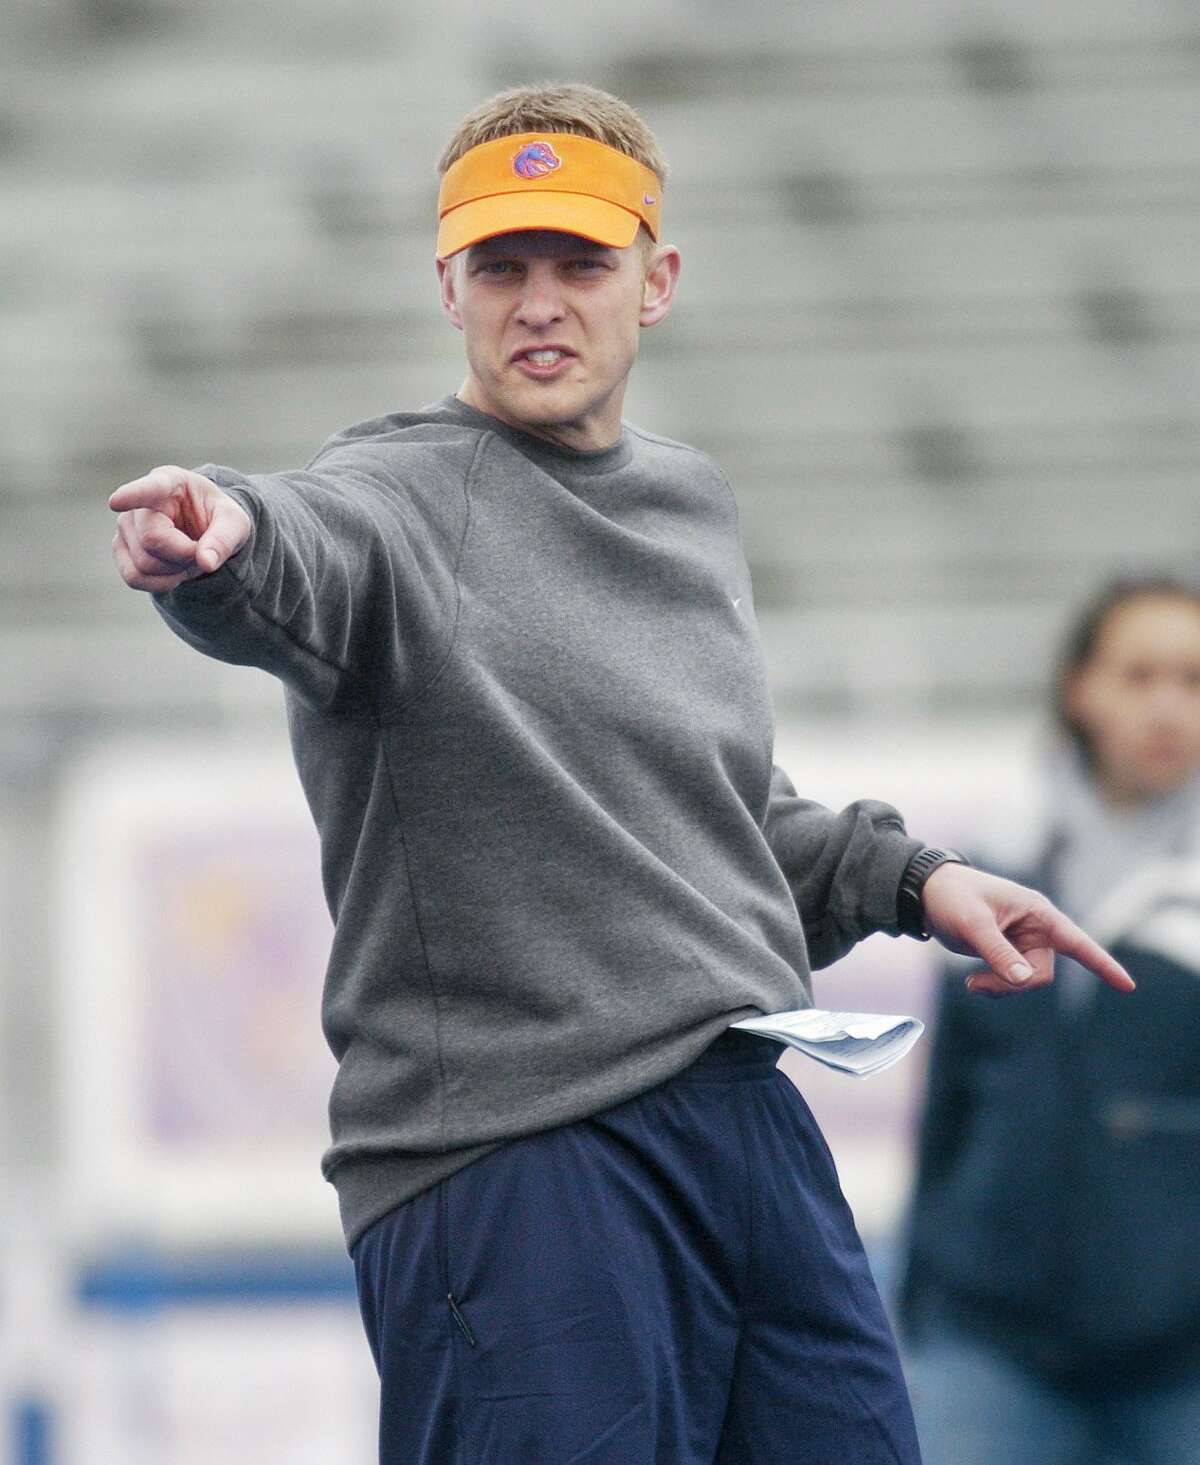 Bryan Harsin will call the plays for the first time as the Boise State offensive coordinator in today ?s first scrimmage of the Broncos ? spring practice. Harsin backed up standout BSU quarterback Bart Hendricks in the late 1990s and began coaching at BSU in 2001 as a graduate assistant. Now at age 29, Harsin is one of the youngest offensive coordinators in the country.